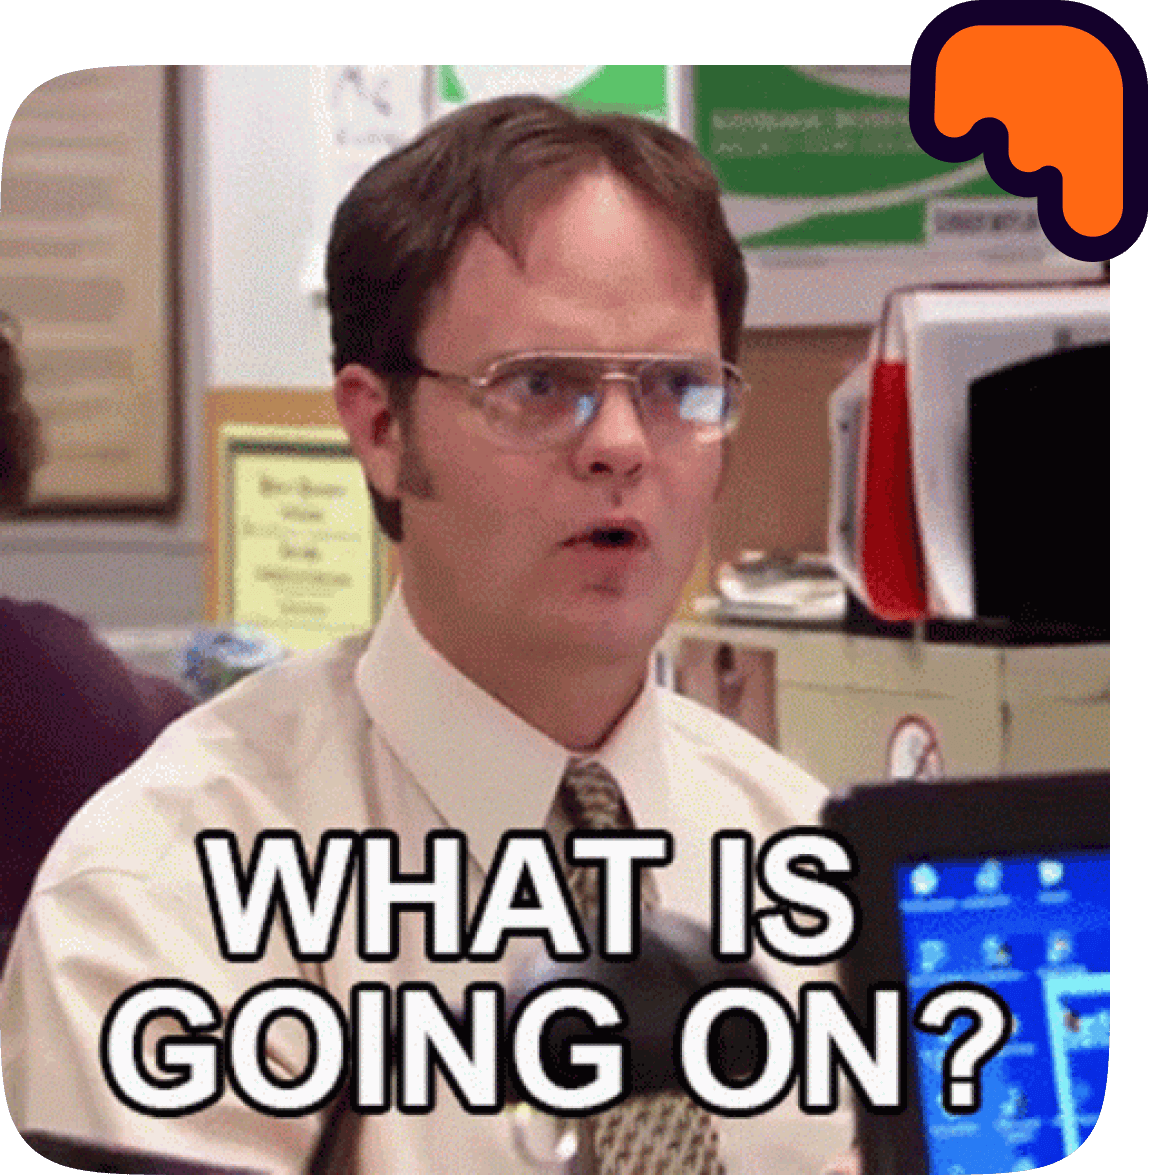 What's going on in the investing world, Dwight Schrute meme